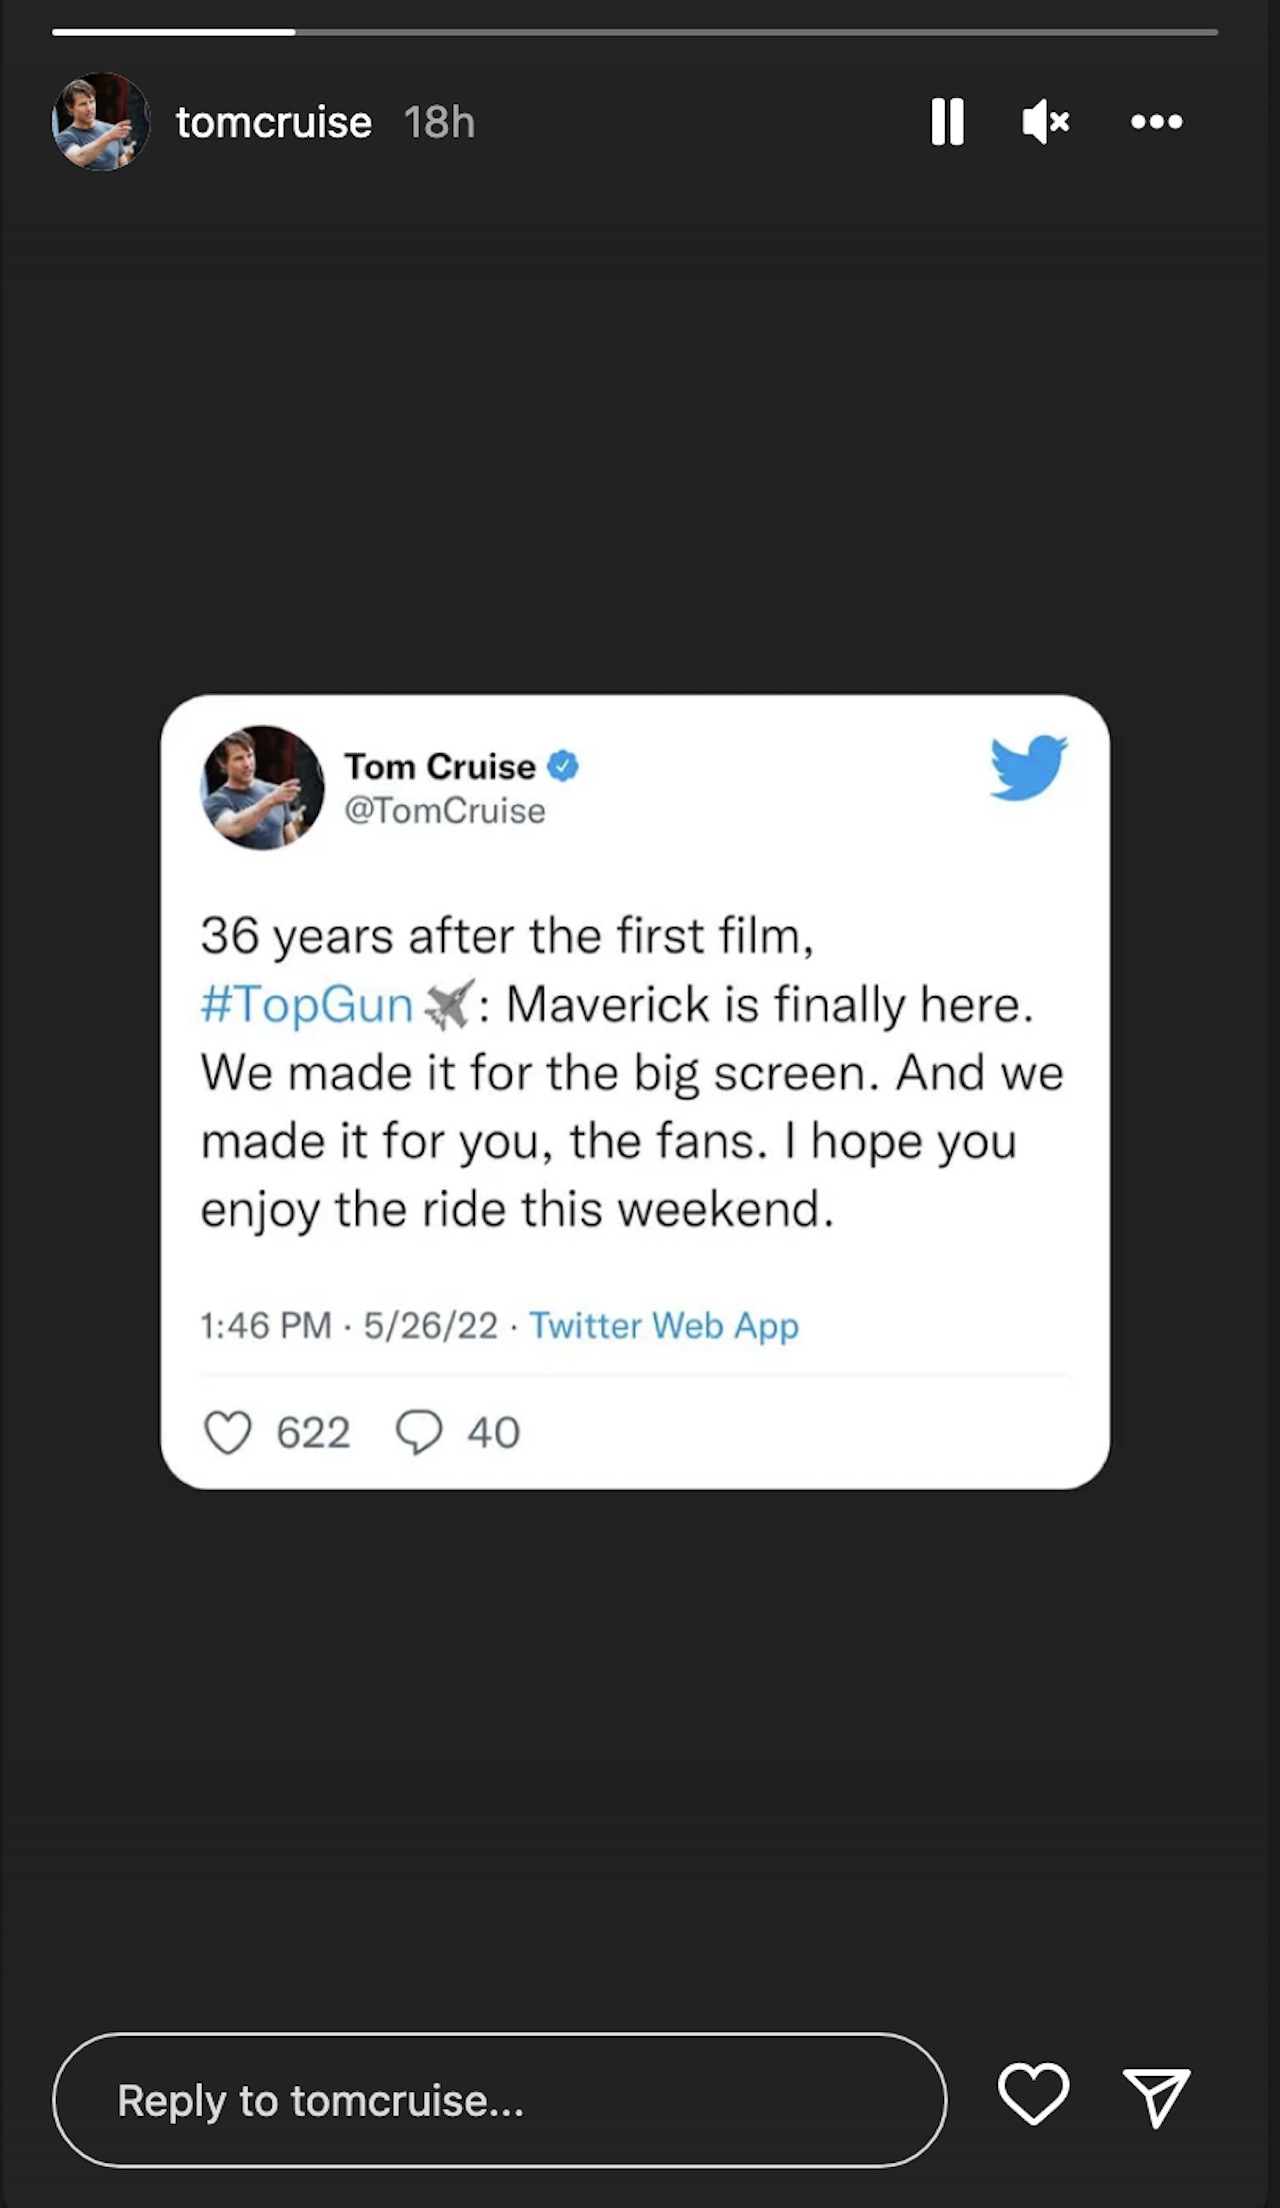 Tom Cruise's fan message from his Instagram Stories